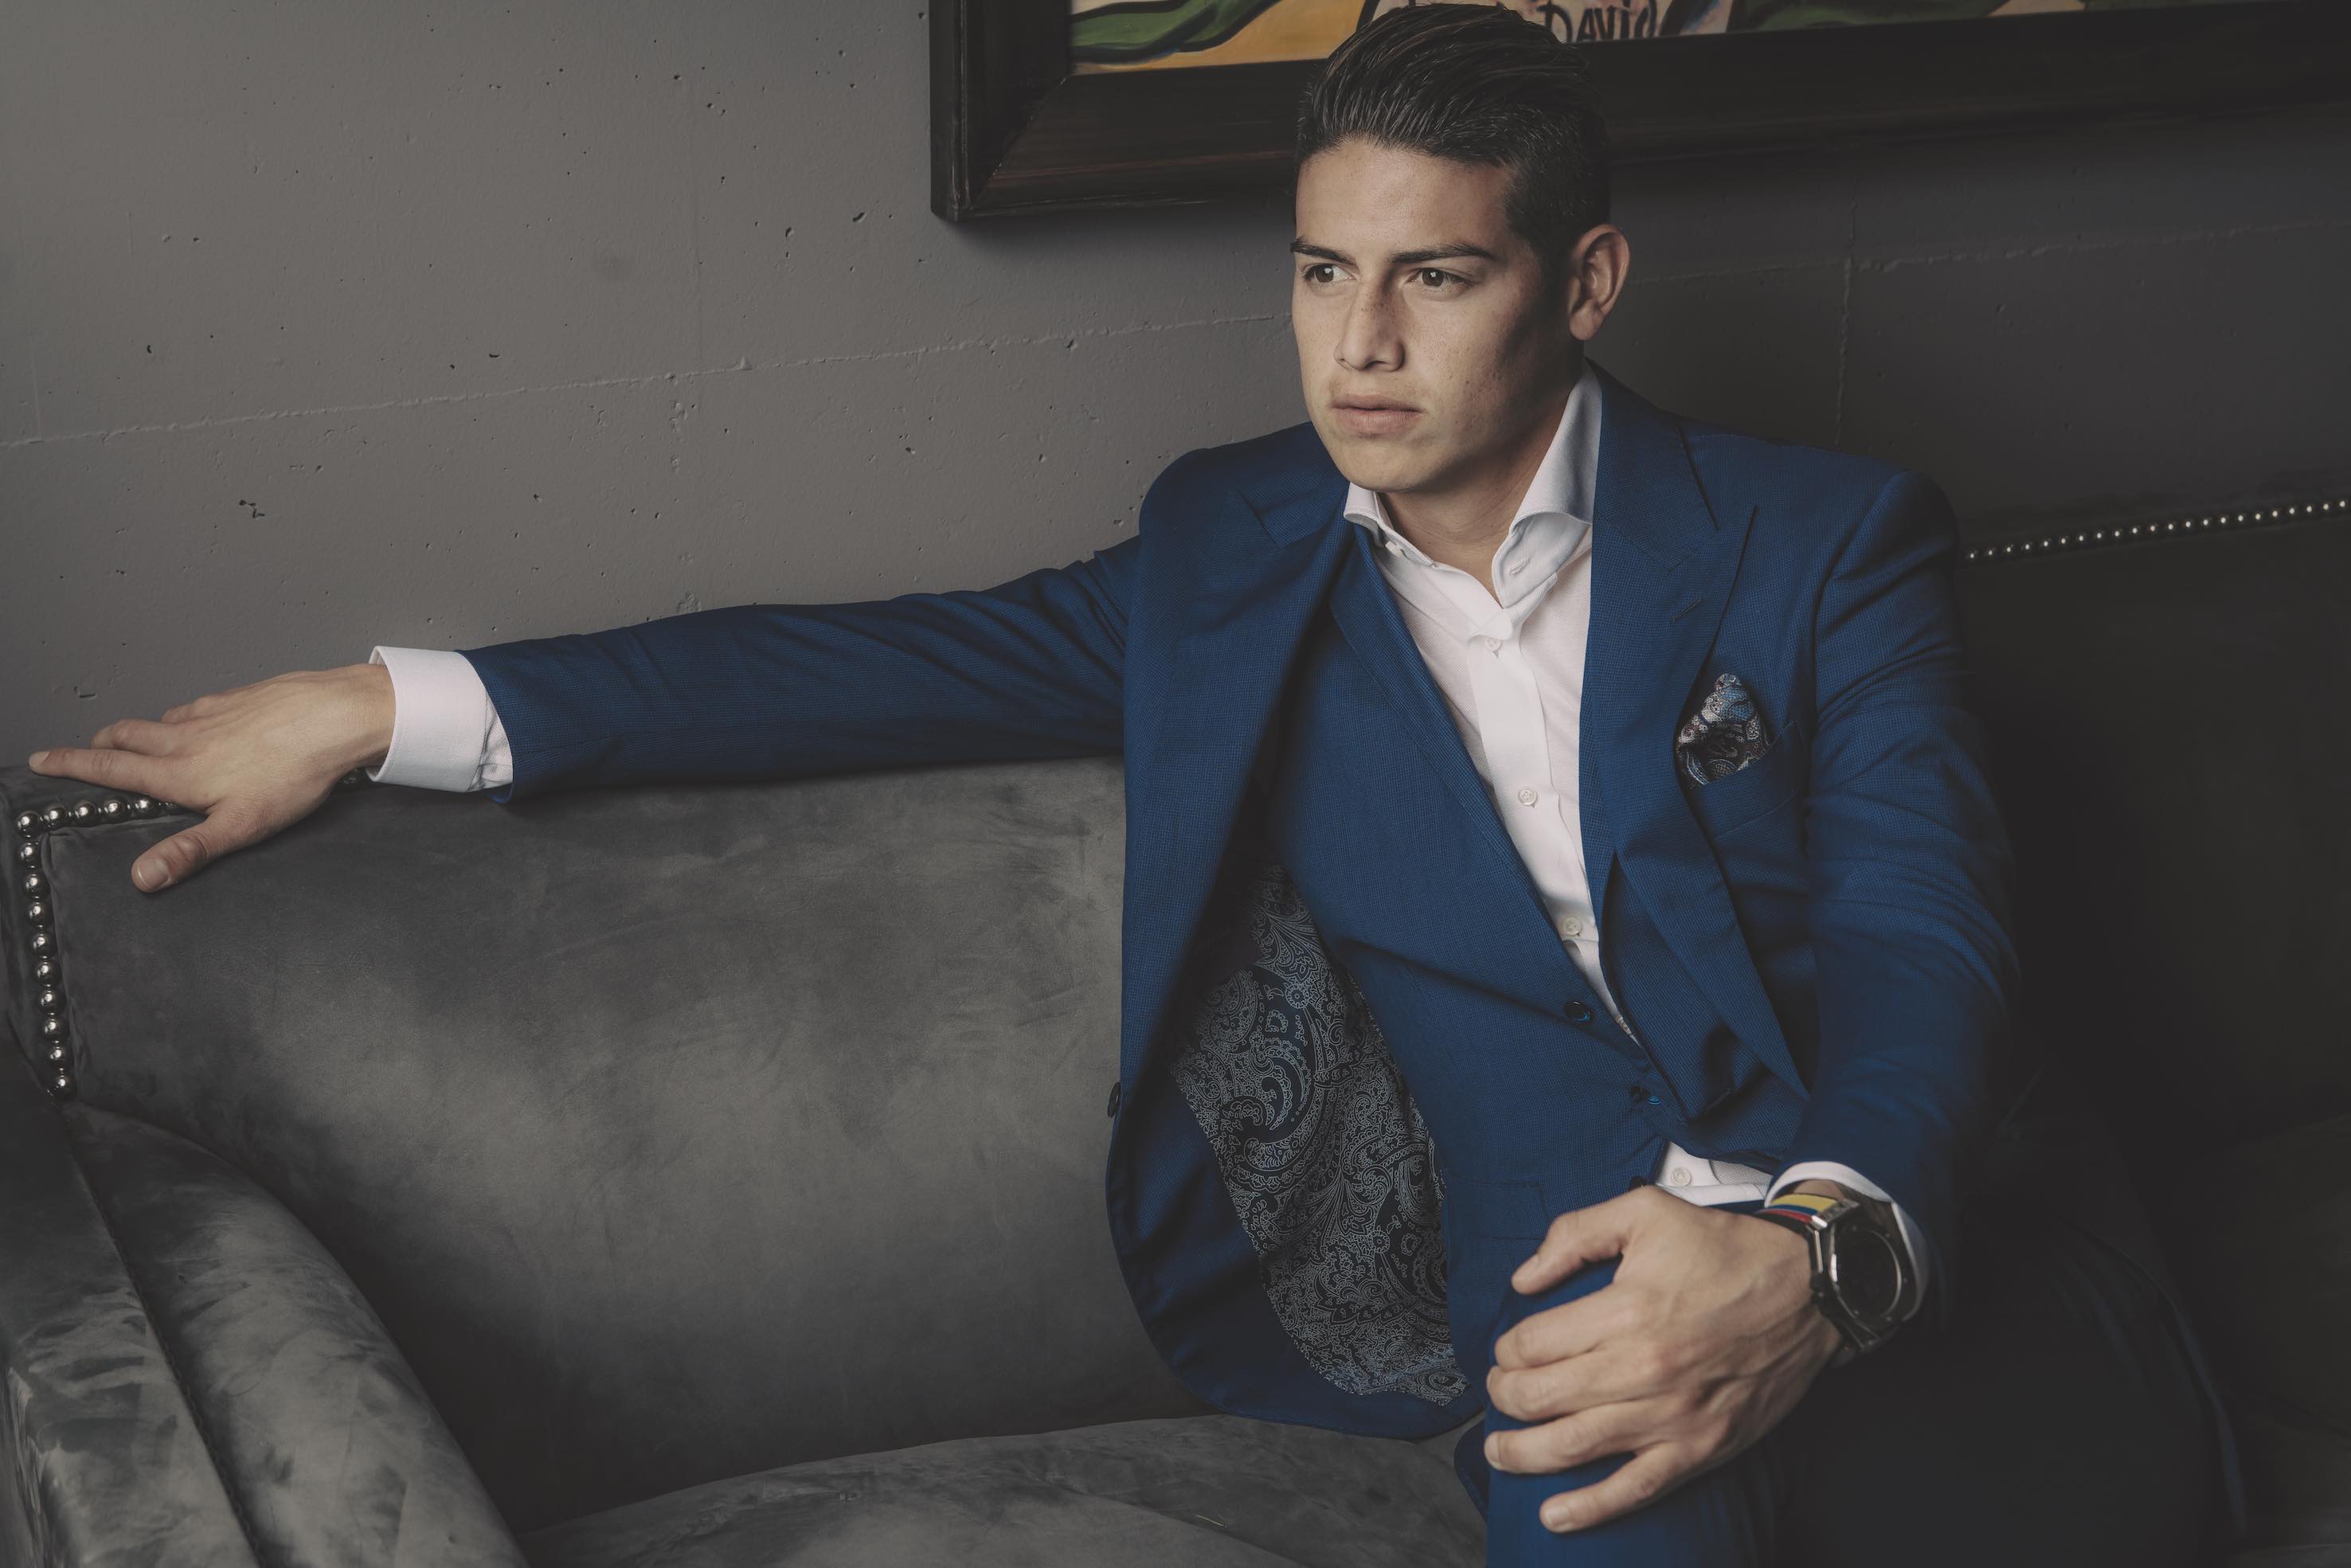 One-On-One With Colombian Soccer Star & Hublot’s Latest Friend Of The Brand, James Rodríguez